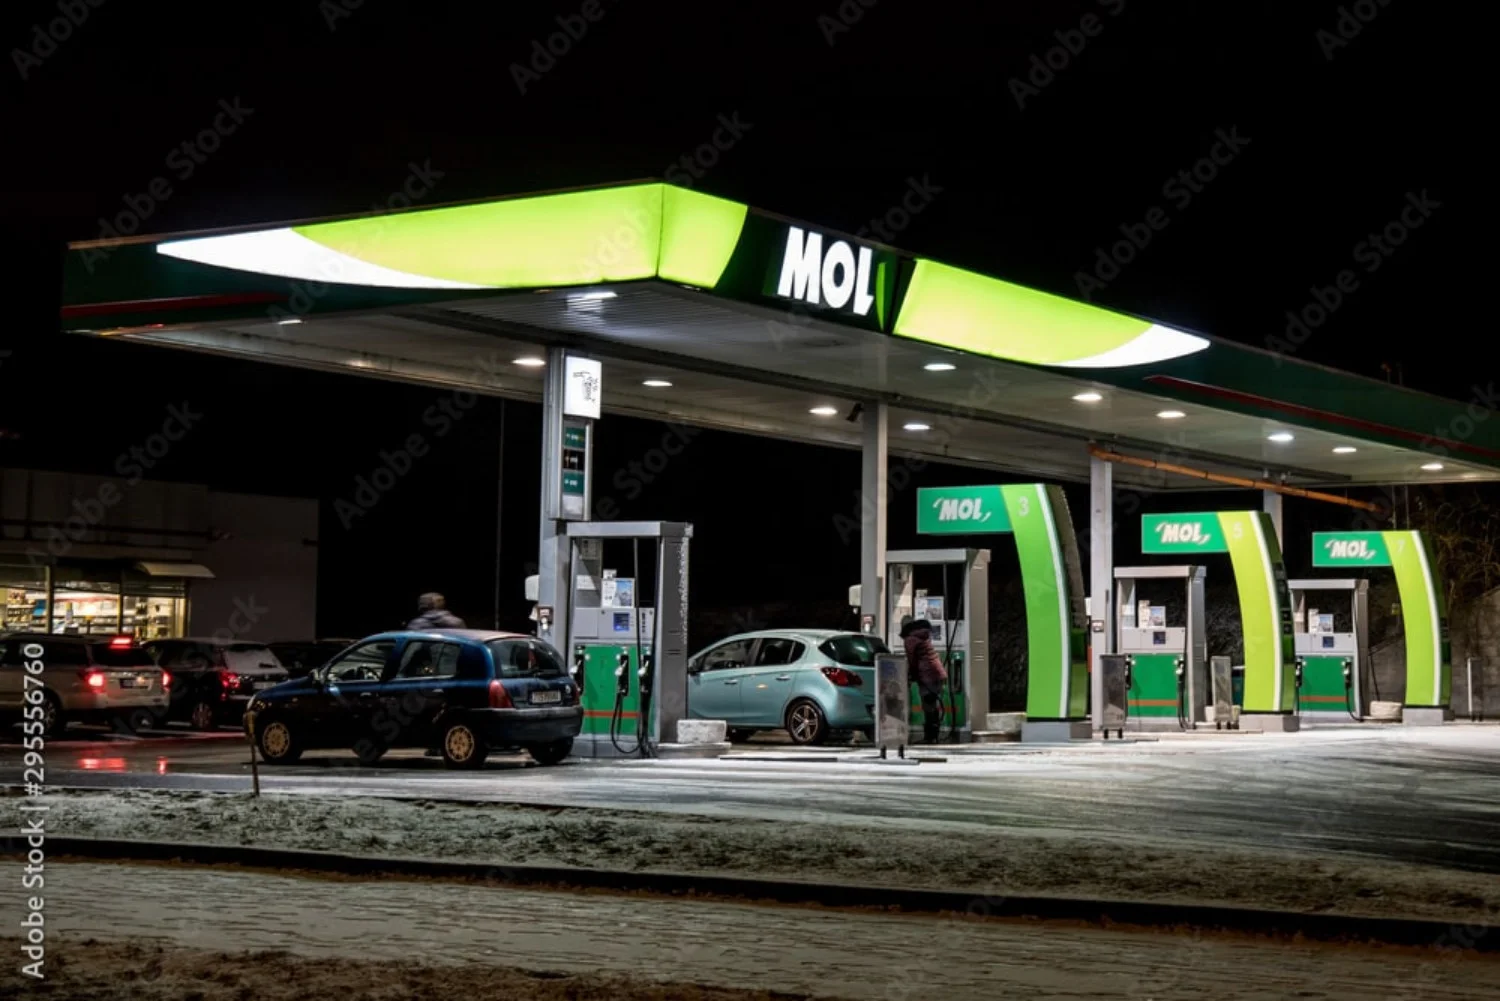 MOL gas stations offer a range of services supplementary to providing fuel, making road trips more convenient.